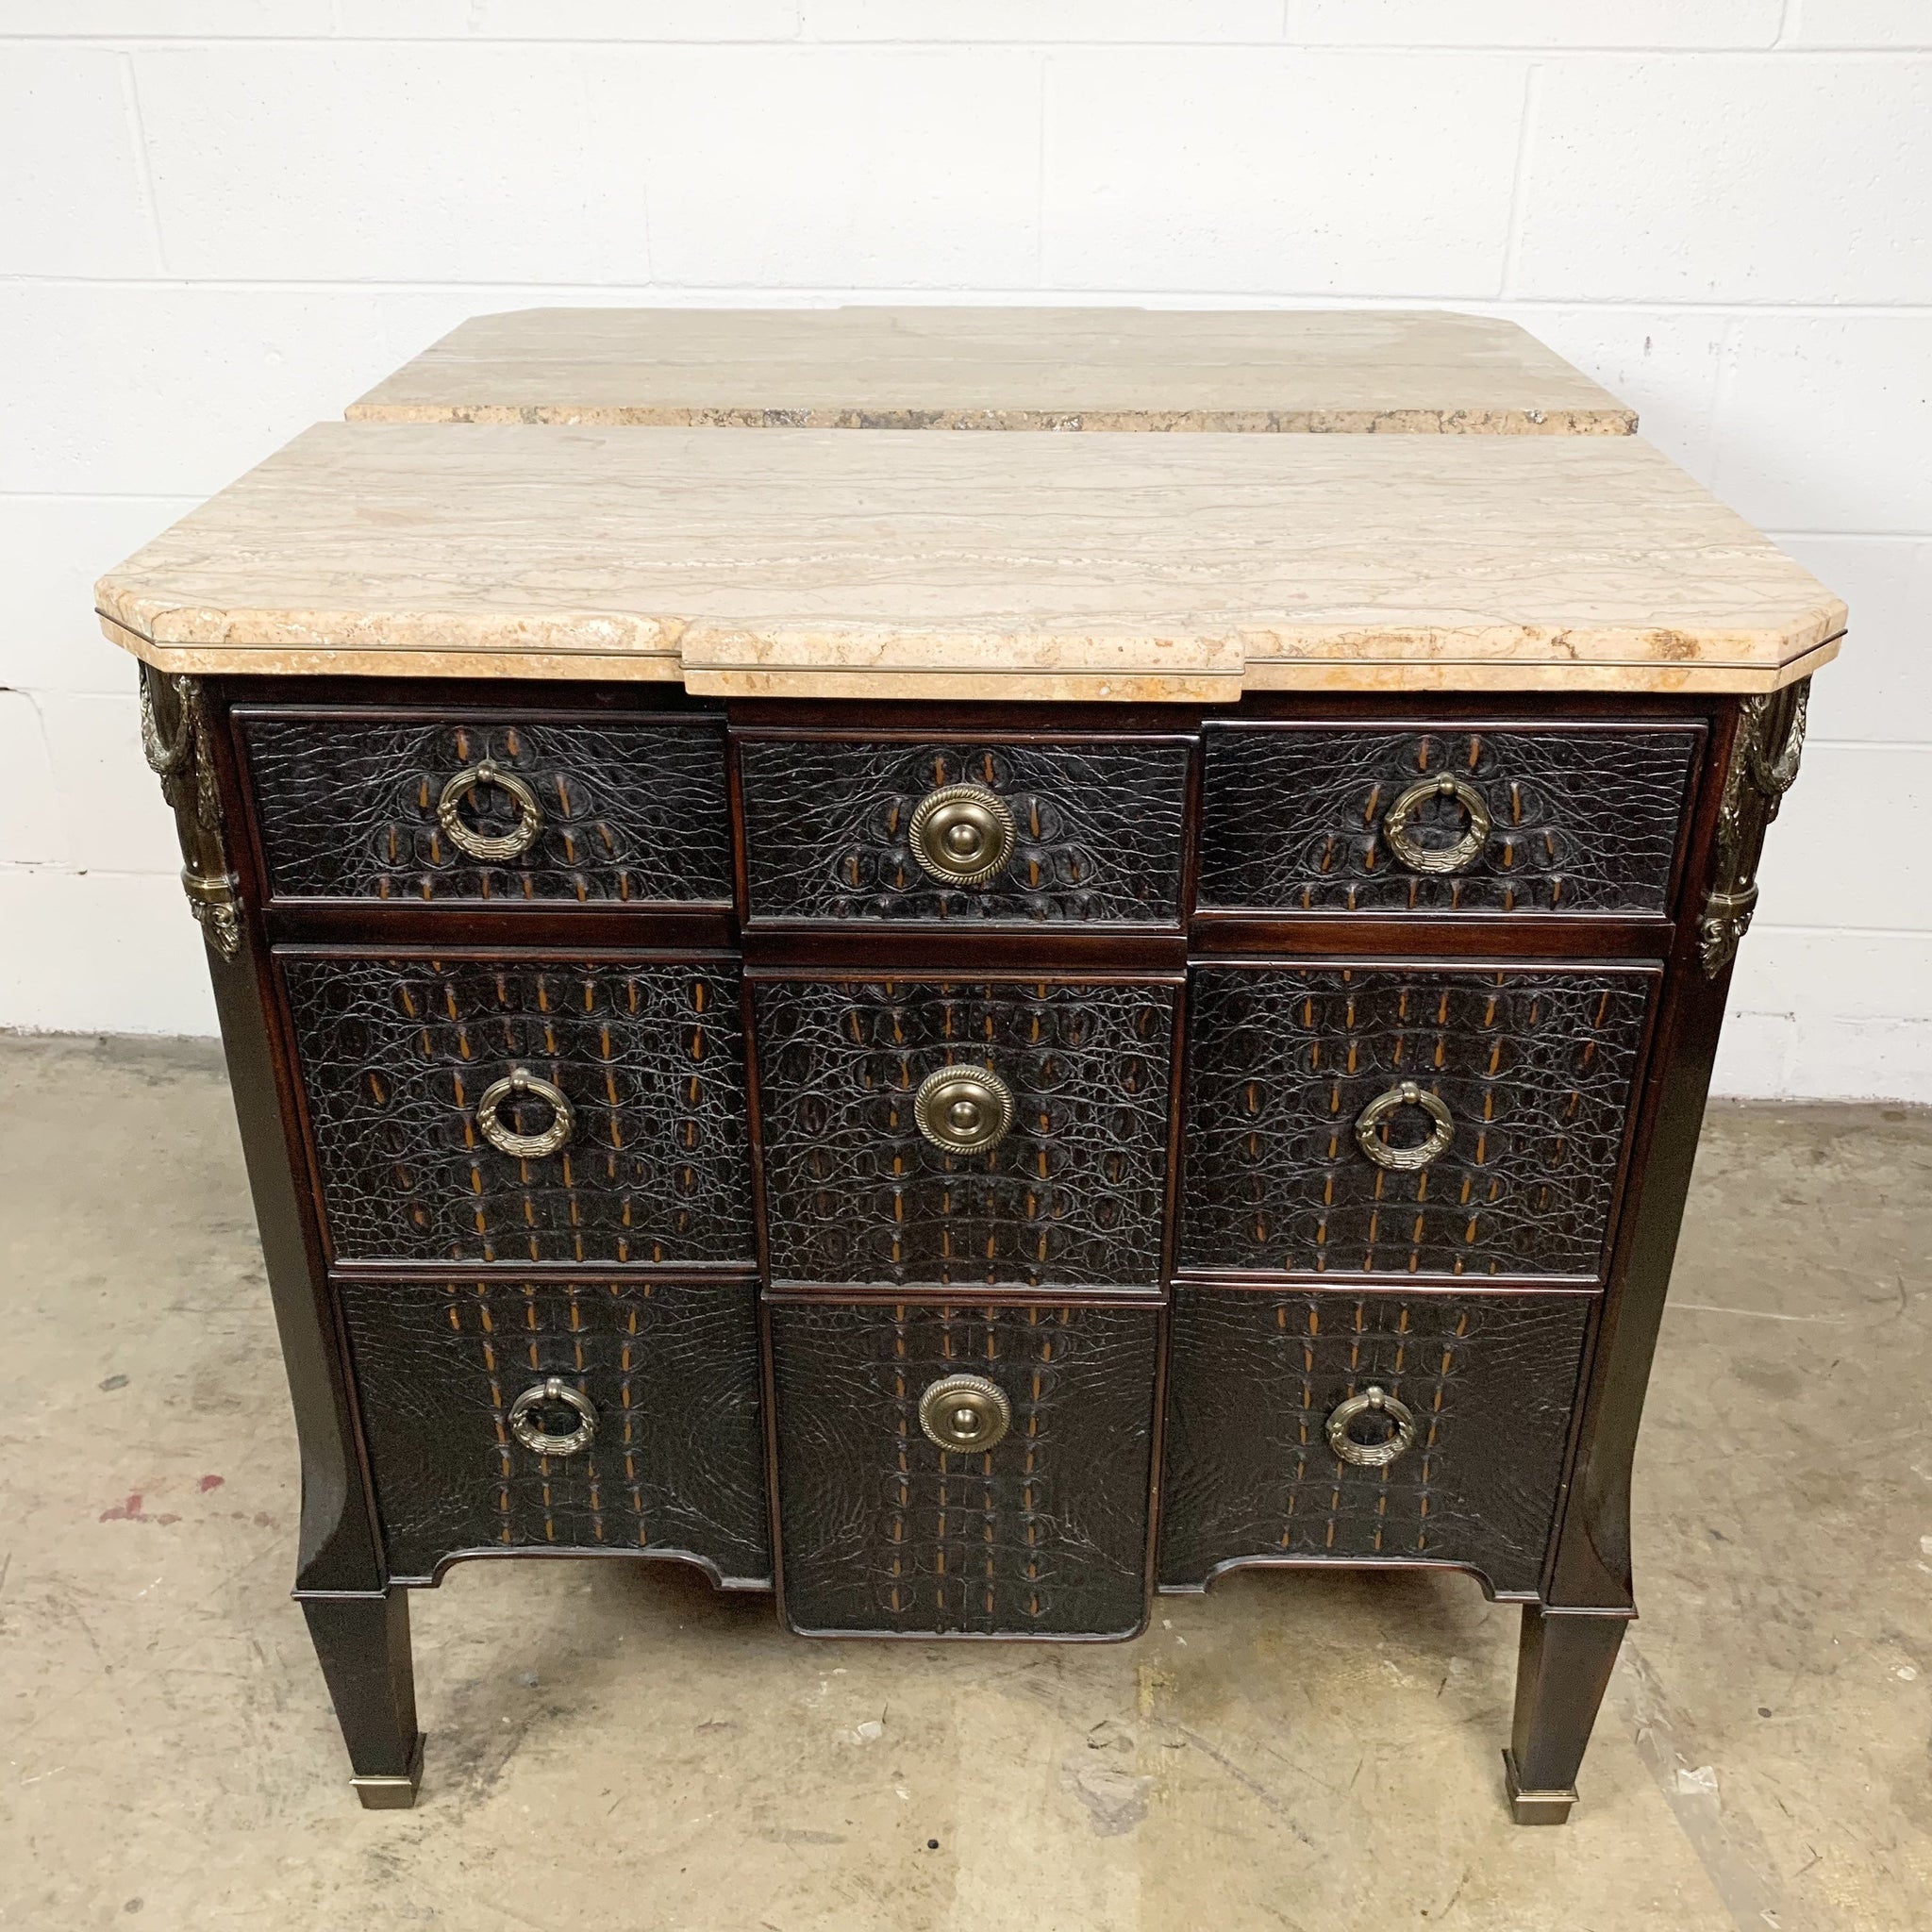 3 Drawer Marble Top Ebonised Chest w/ Brass Accents